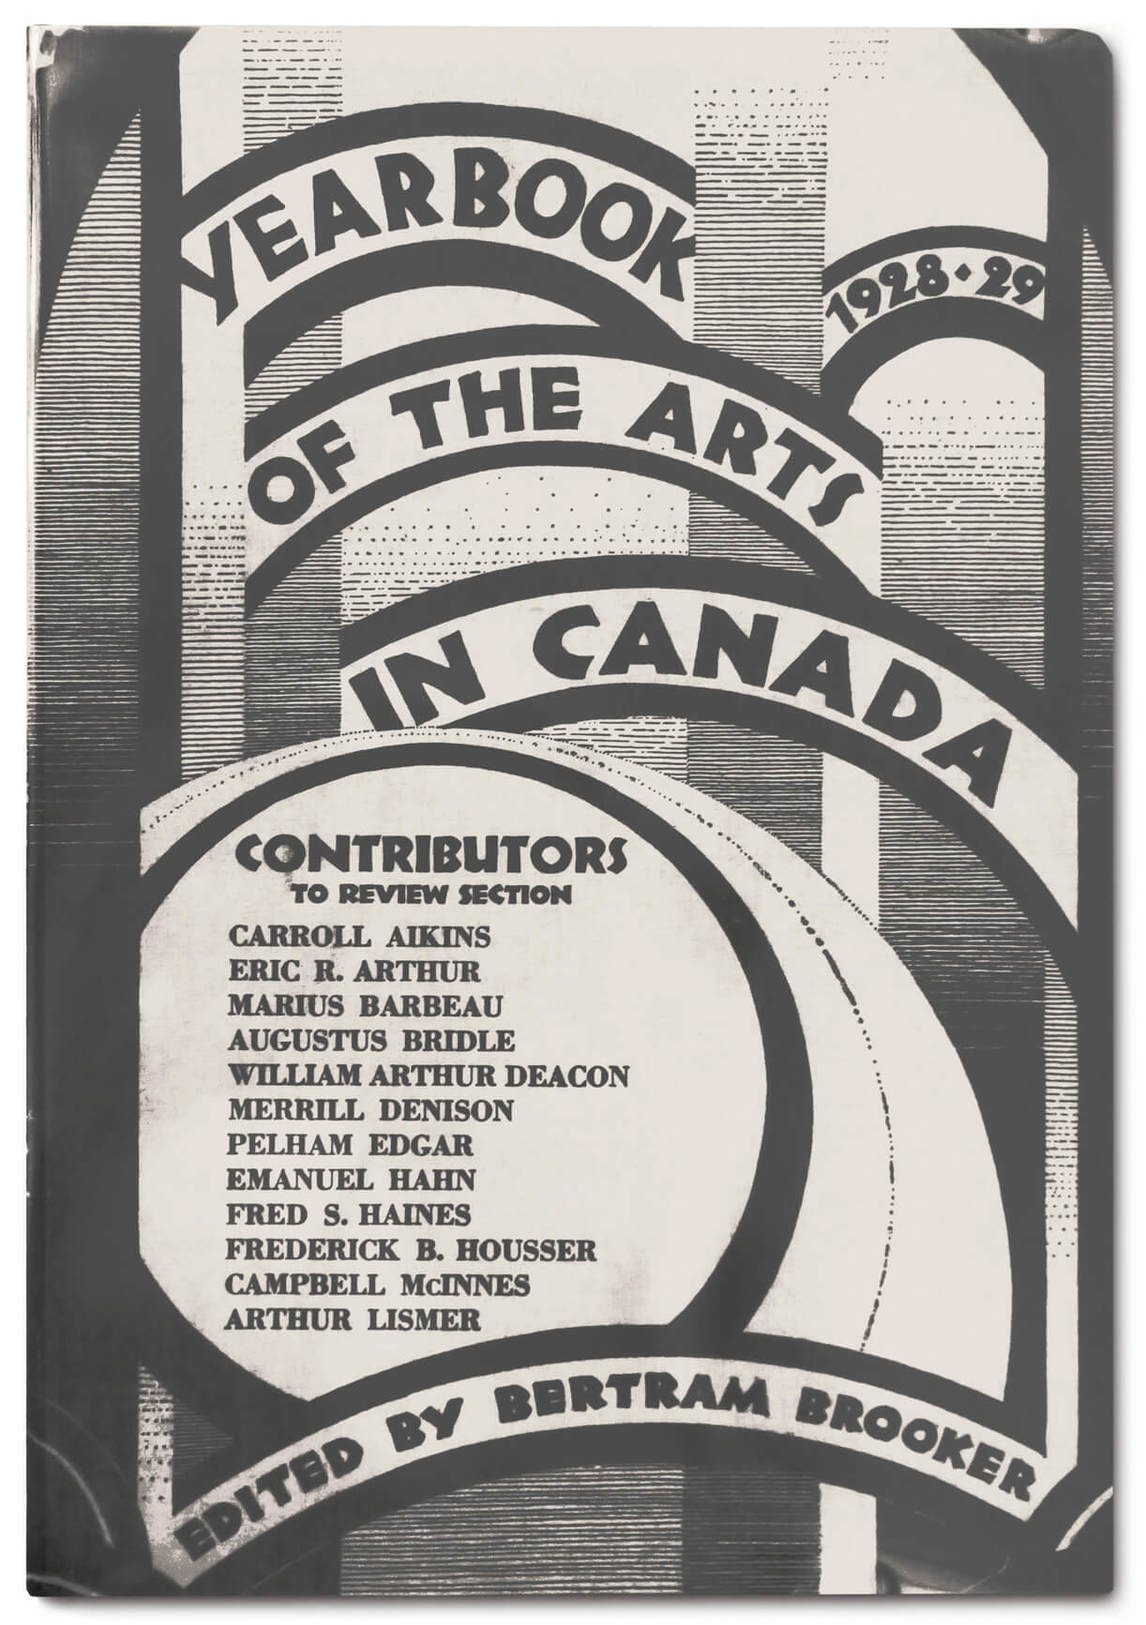 Page couverture du Yearbook of the Arts in Canada, 1928-1929